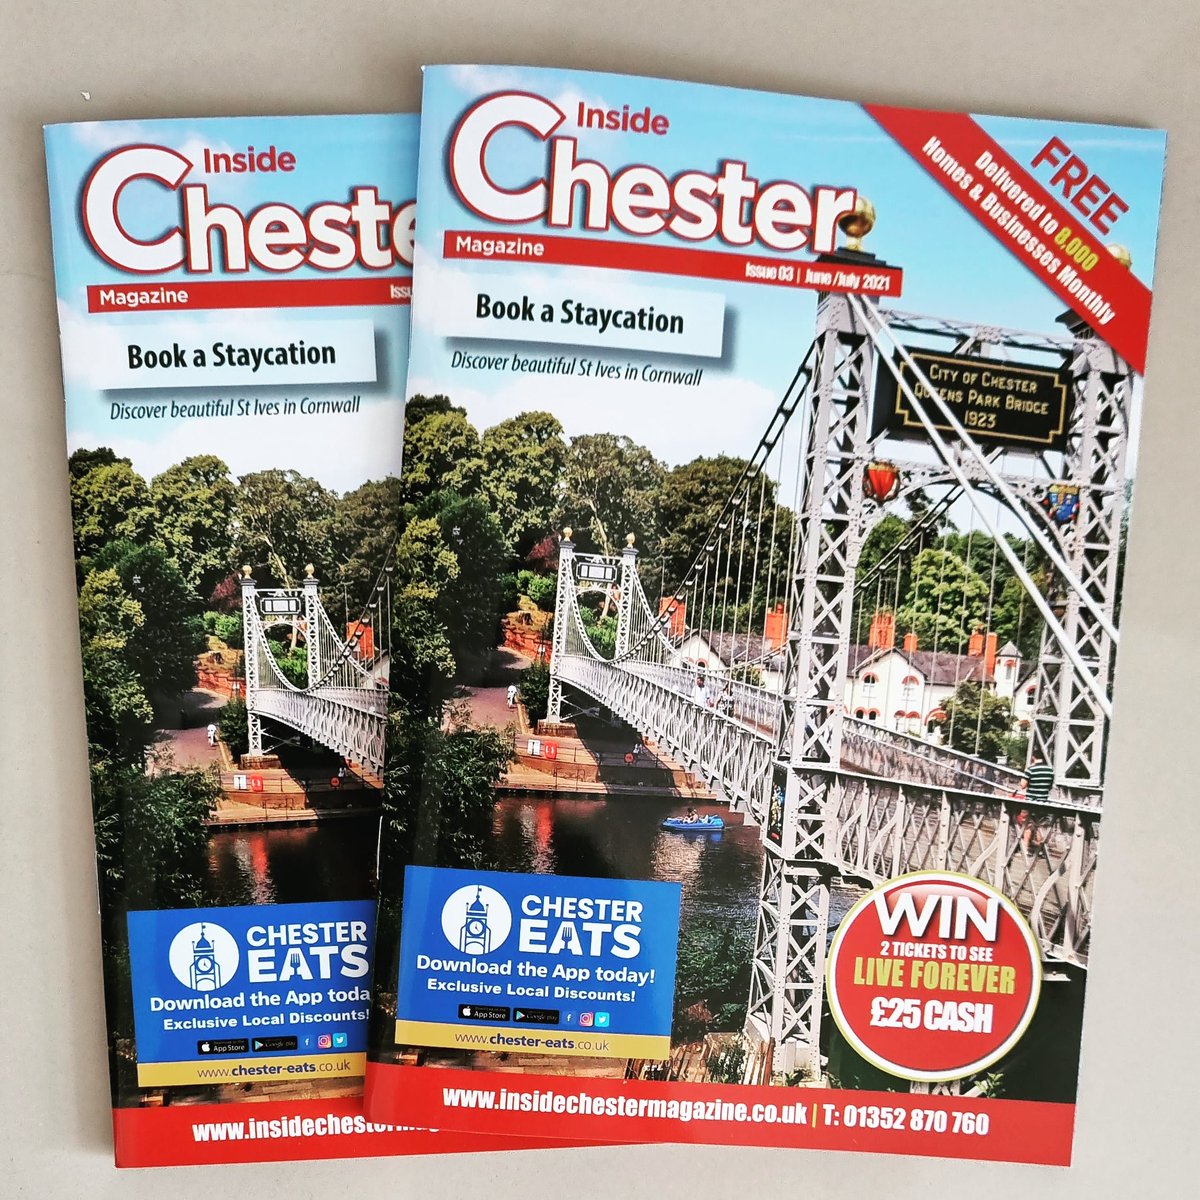 Our #Chester issues are back from the printers. #Cheshire insidechestermagazine.co.uk